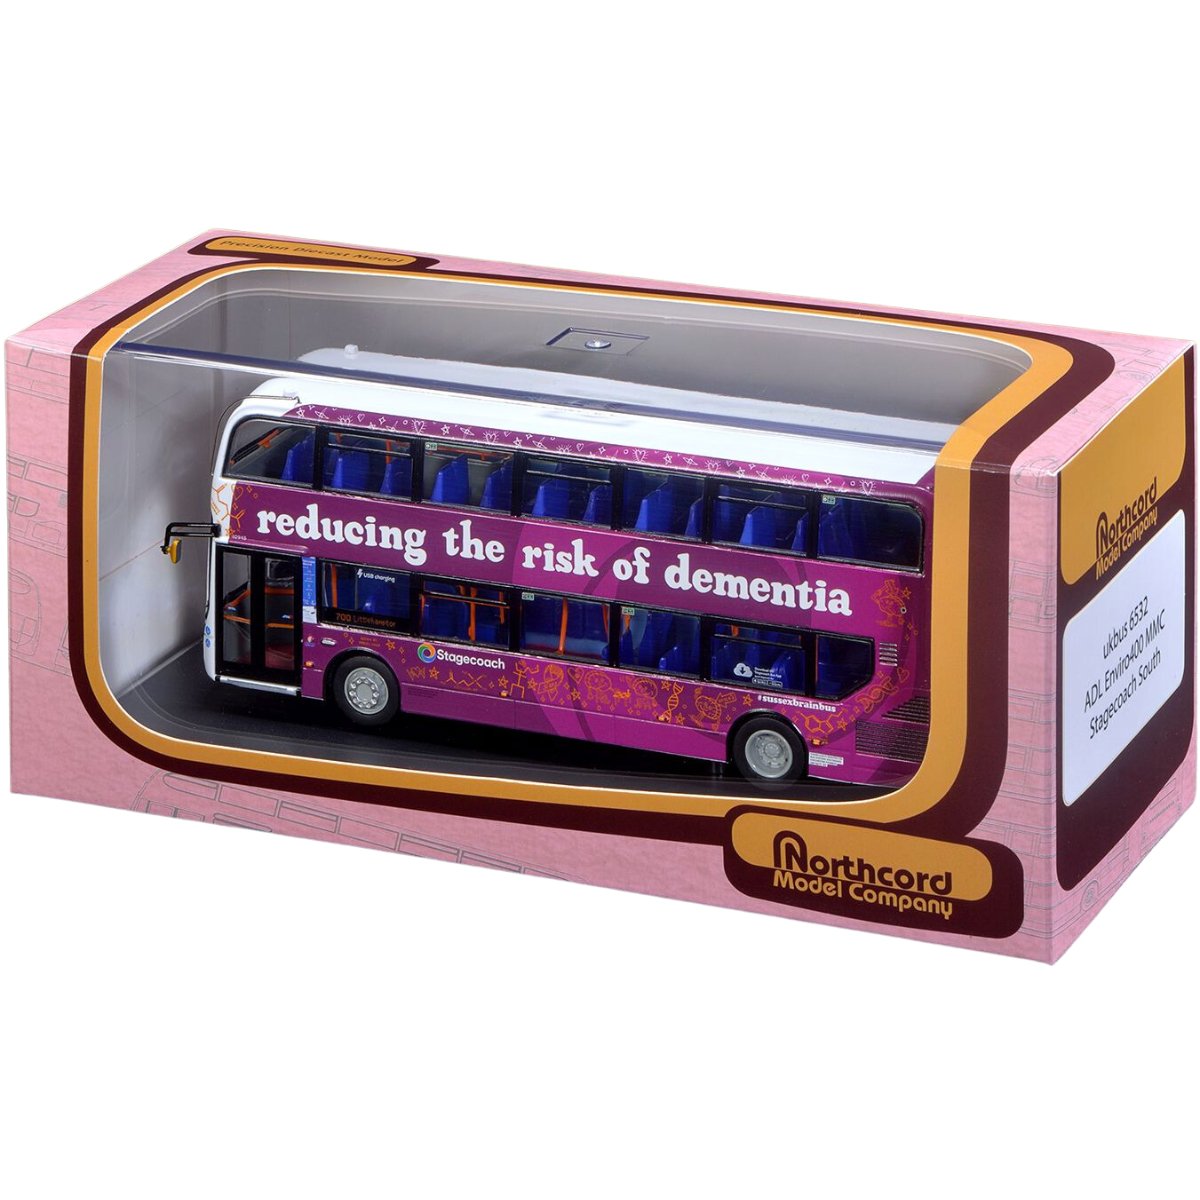 1:76 Scale Model Bus - Northcord UK6532 ADL Enviro400 Stagecoach South Sussex Brain Bus